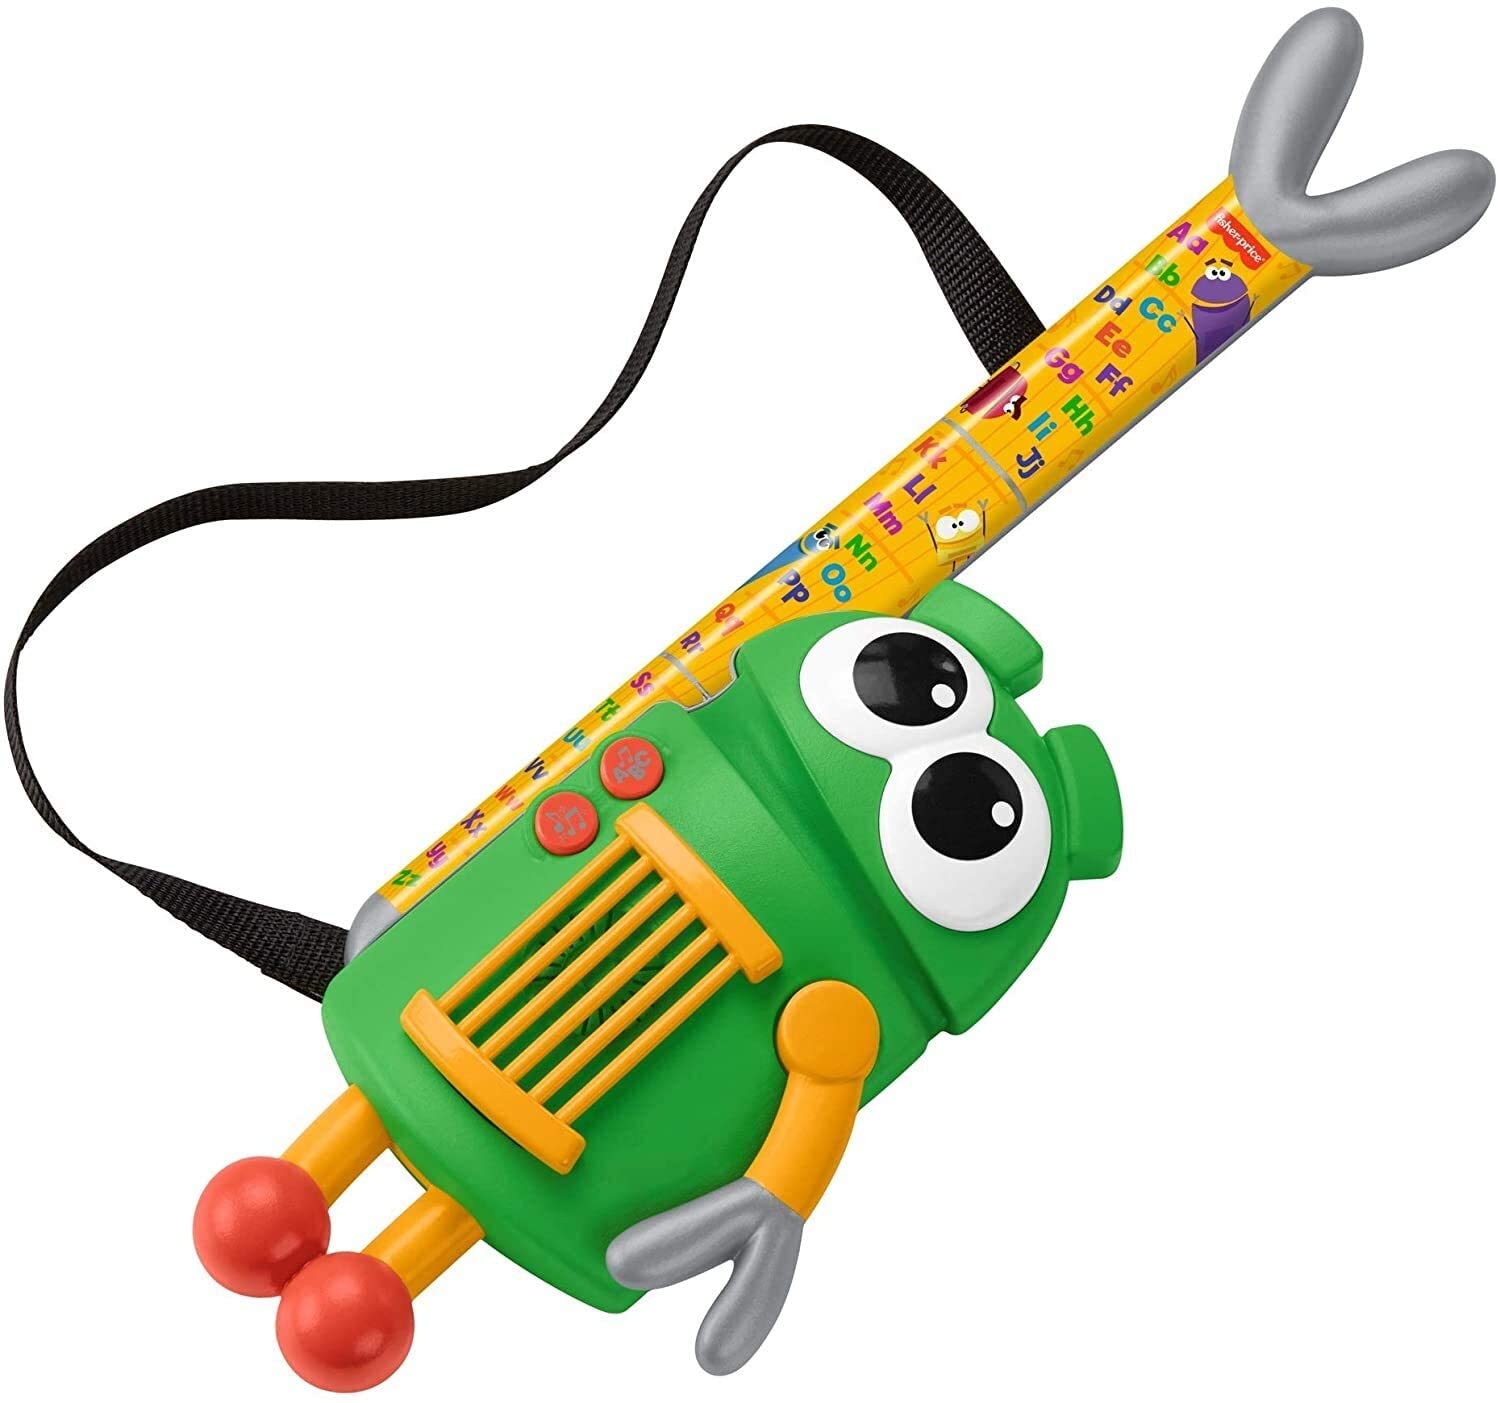 Fisher-Price Storybots A to Z Rock Star Guitar $12.50 at Amazon or Walmart